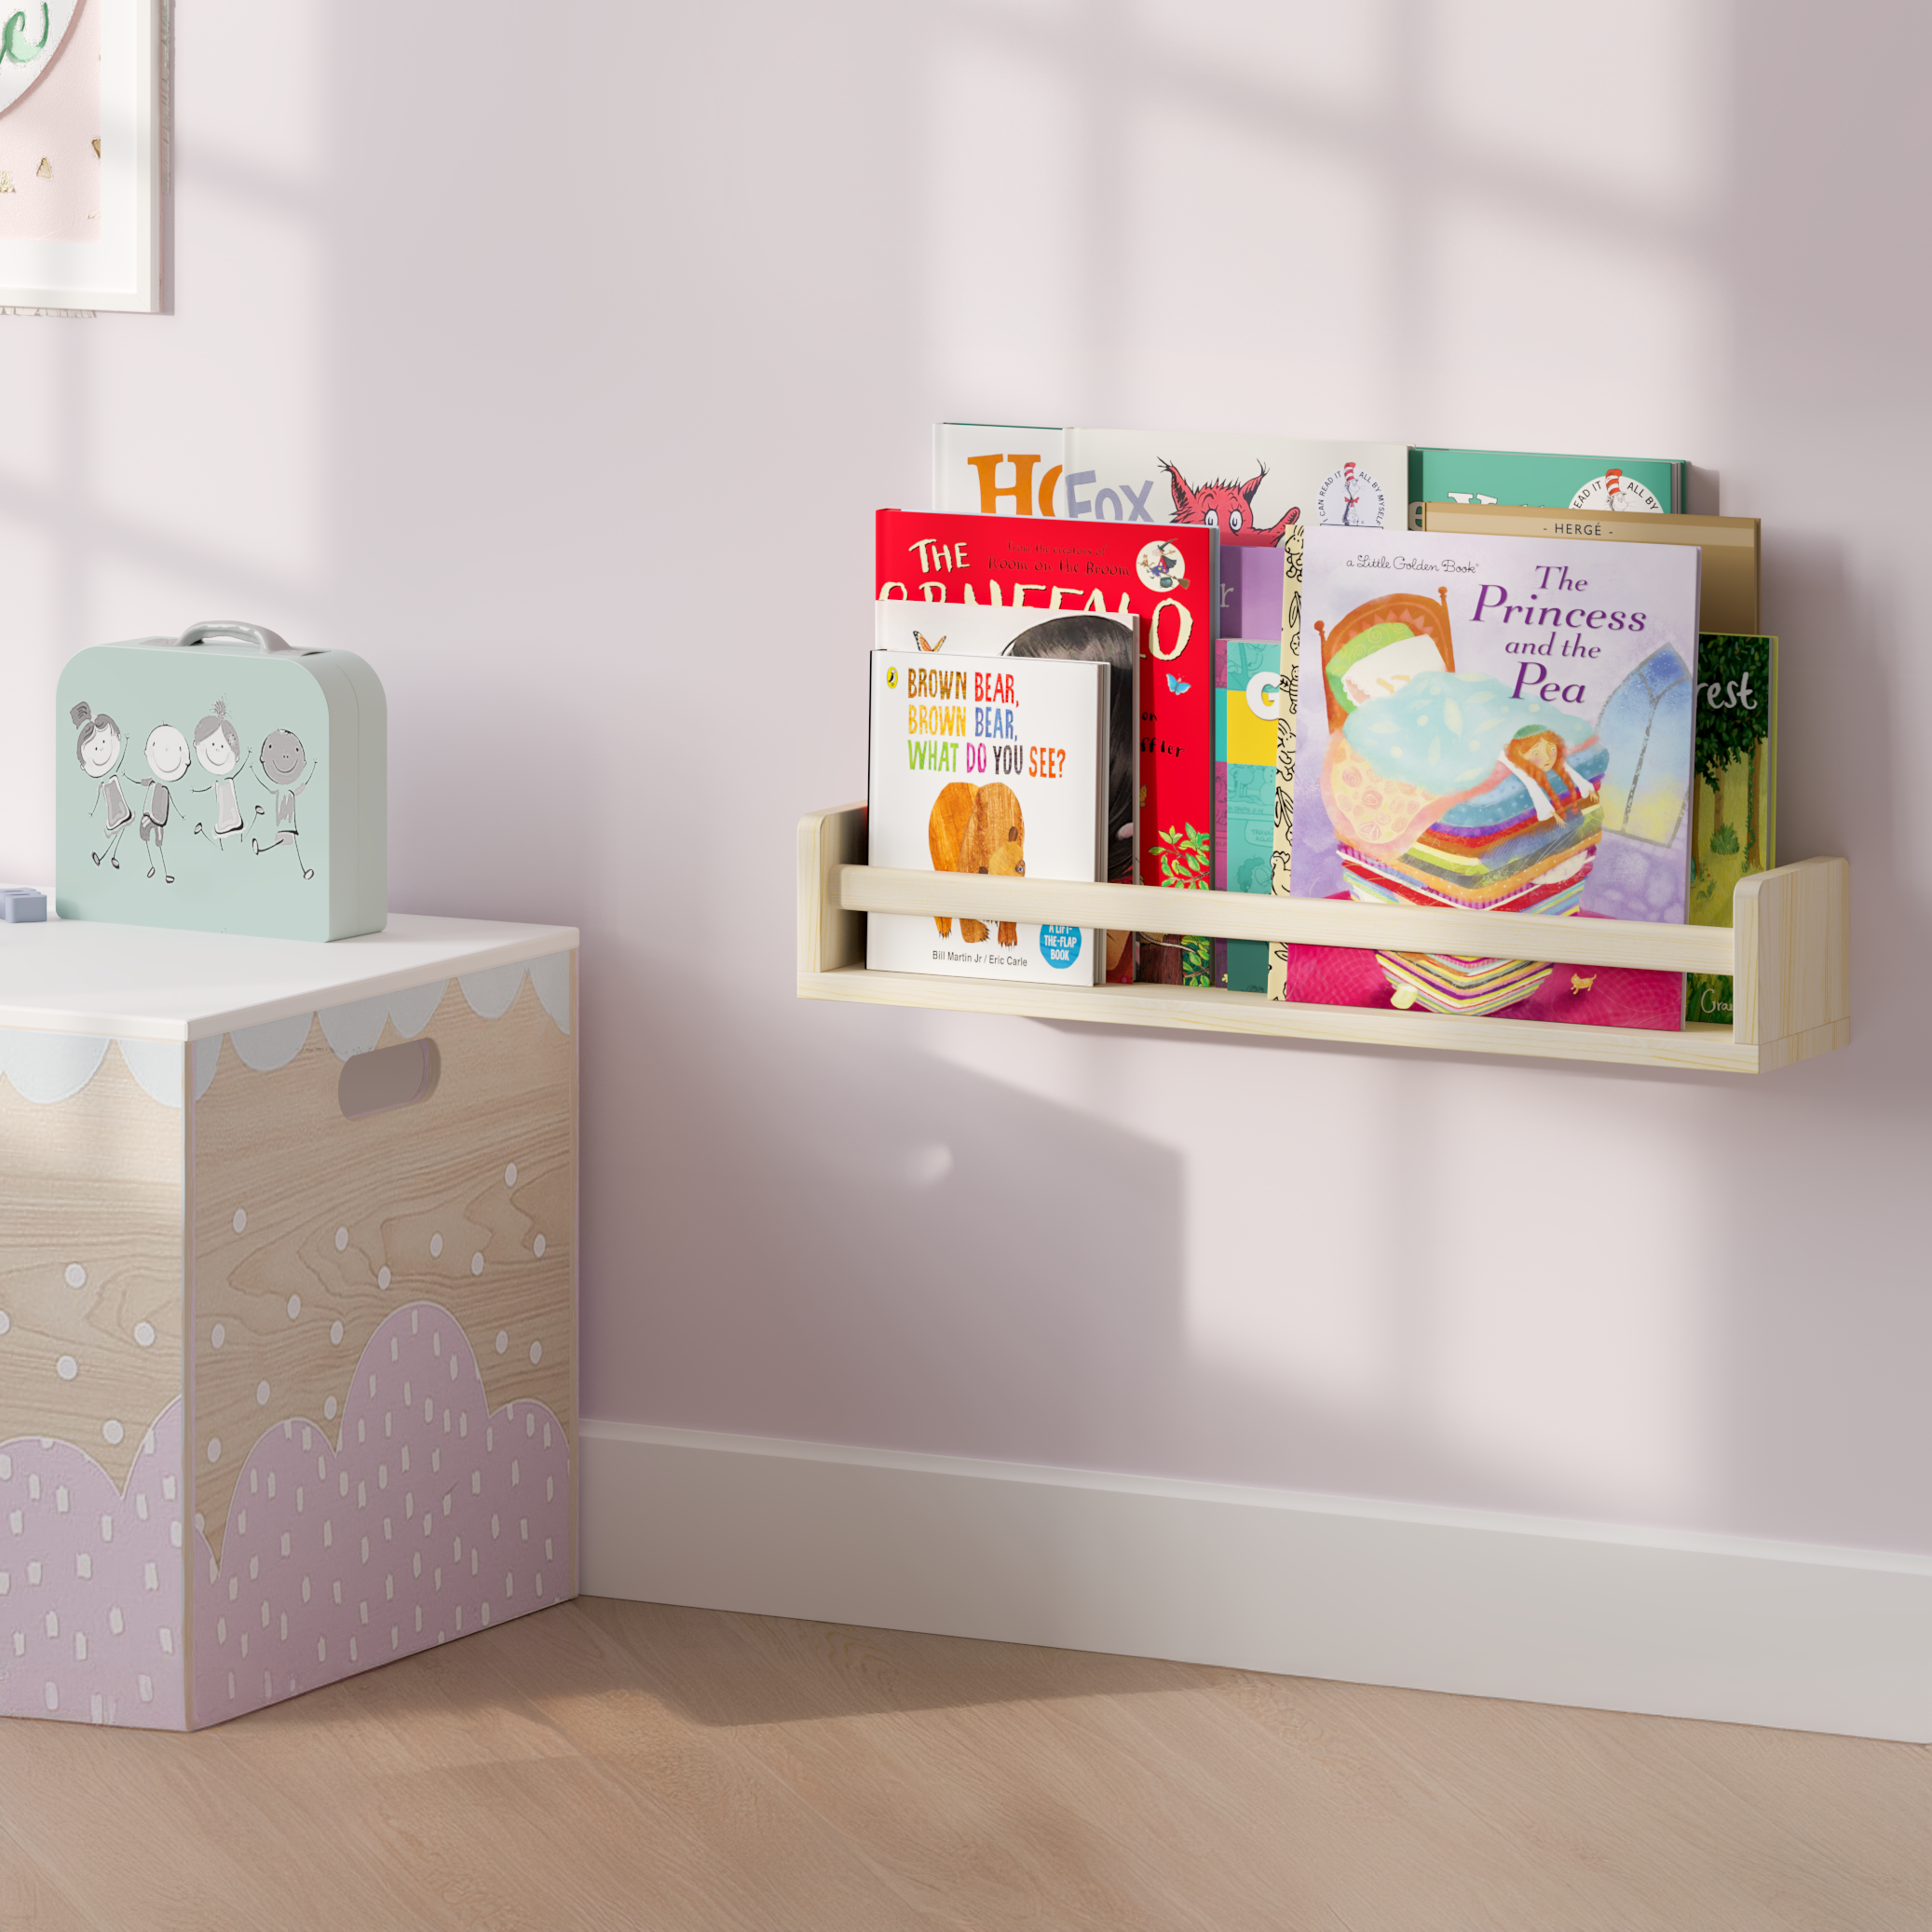 A natural wood wall shelf filled with children's books, mounted on a soft pink wall beside a decorative storage box. The setup creates a charming and organized reading nook for kids.